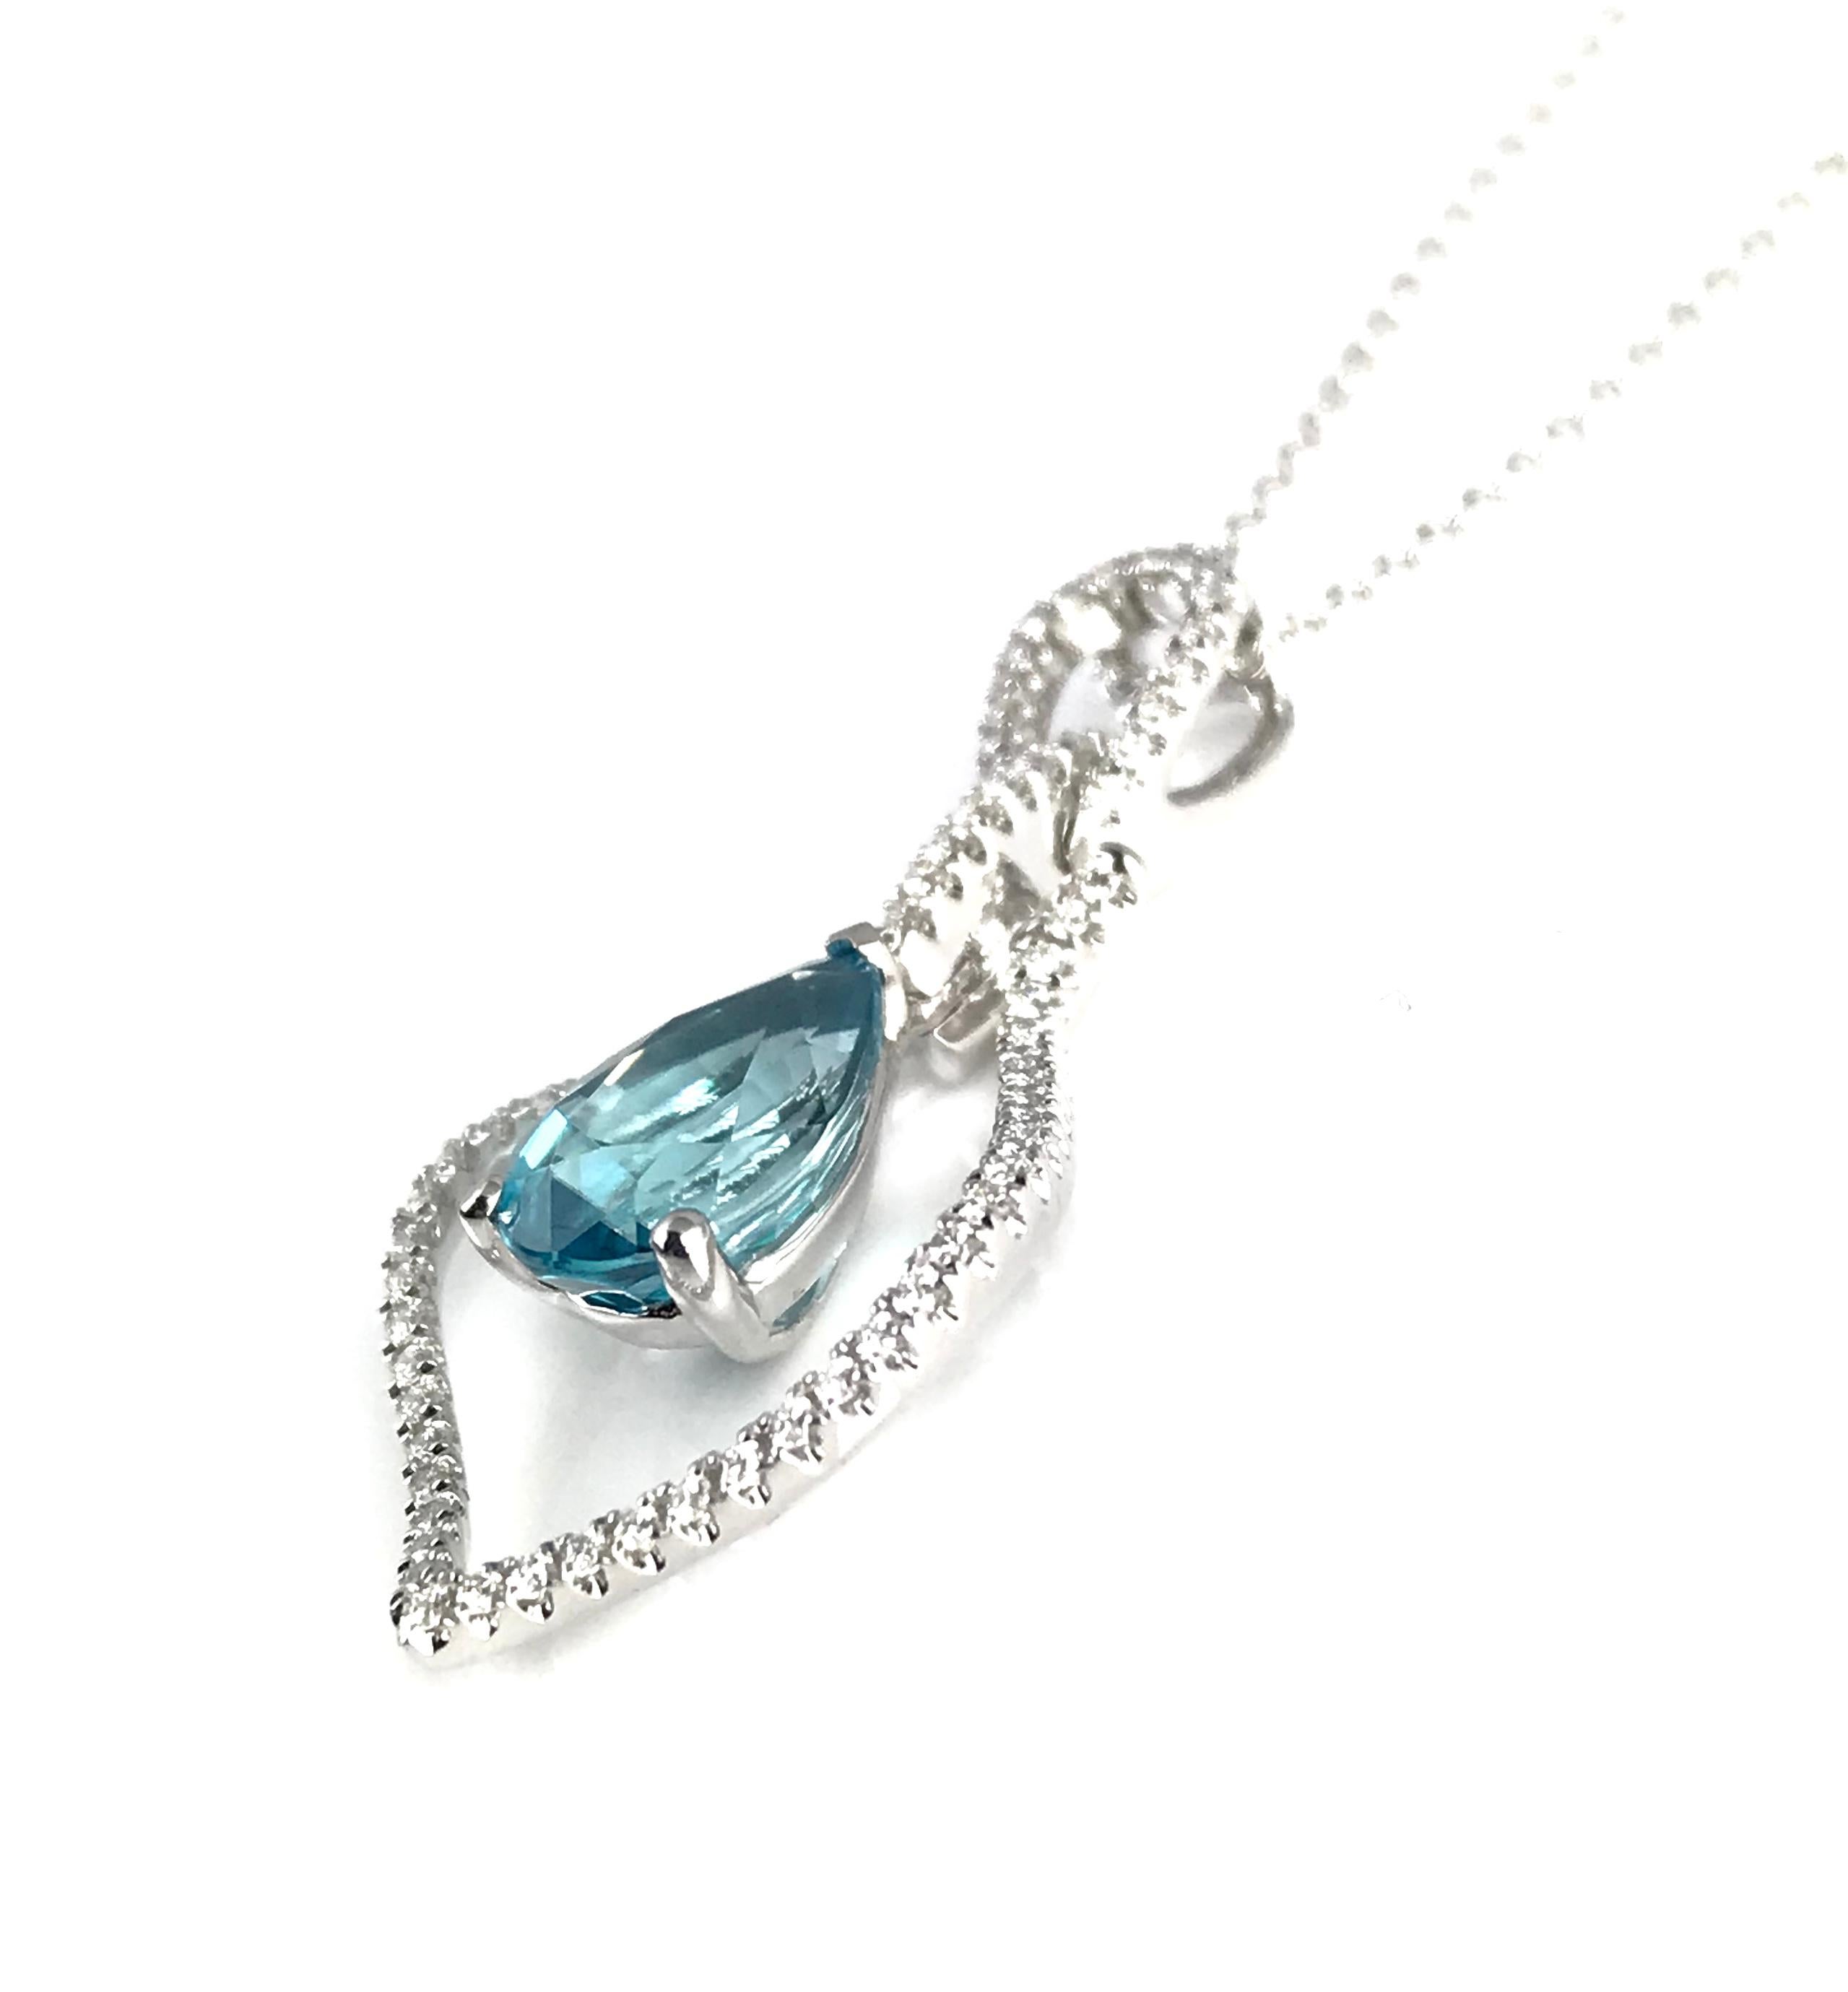 Embrace the allure of our exquisite Blue Zircon Teardrop Pendant, where a singular 2.87 carat pear-shaped blue zircon takes center stage, suspended with grace inside a modern teardrop-shaped diamond frame. The frame itself, adorned with brilliant